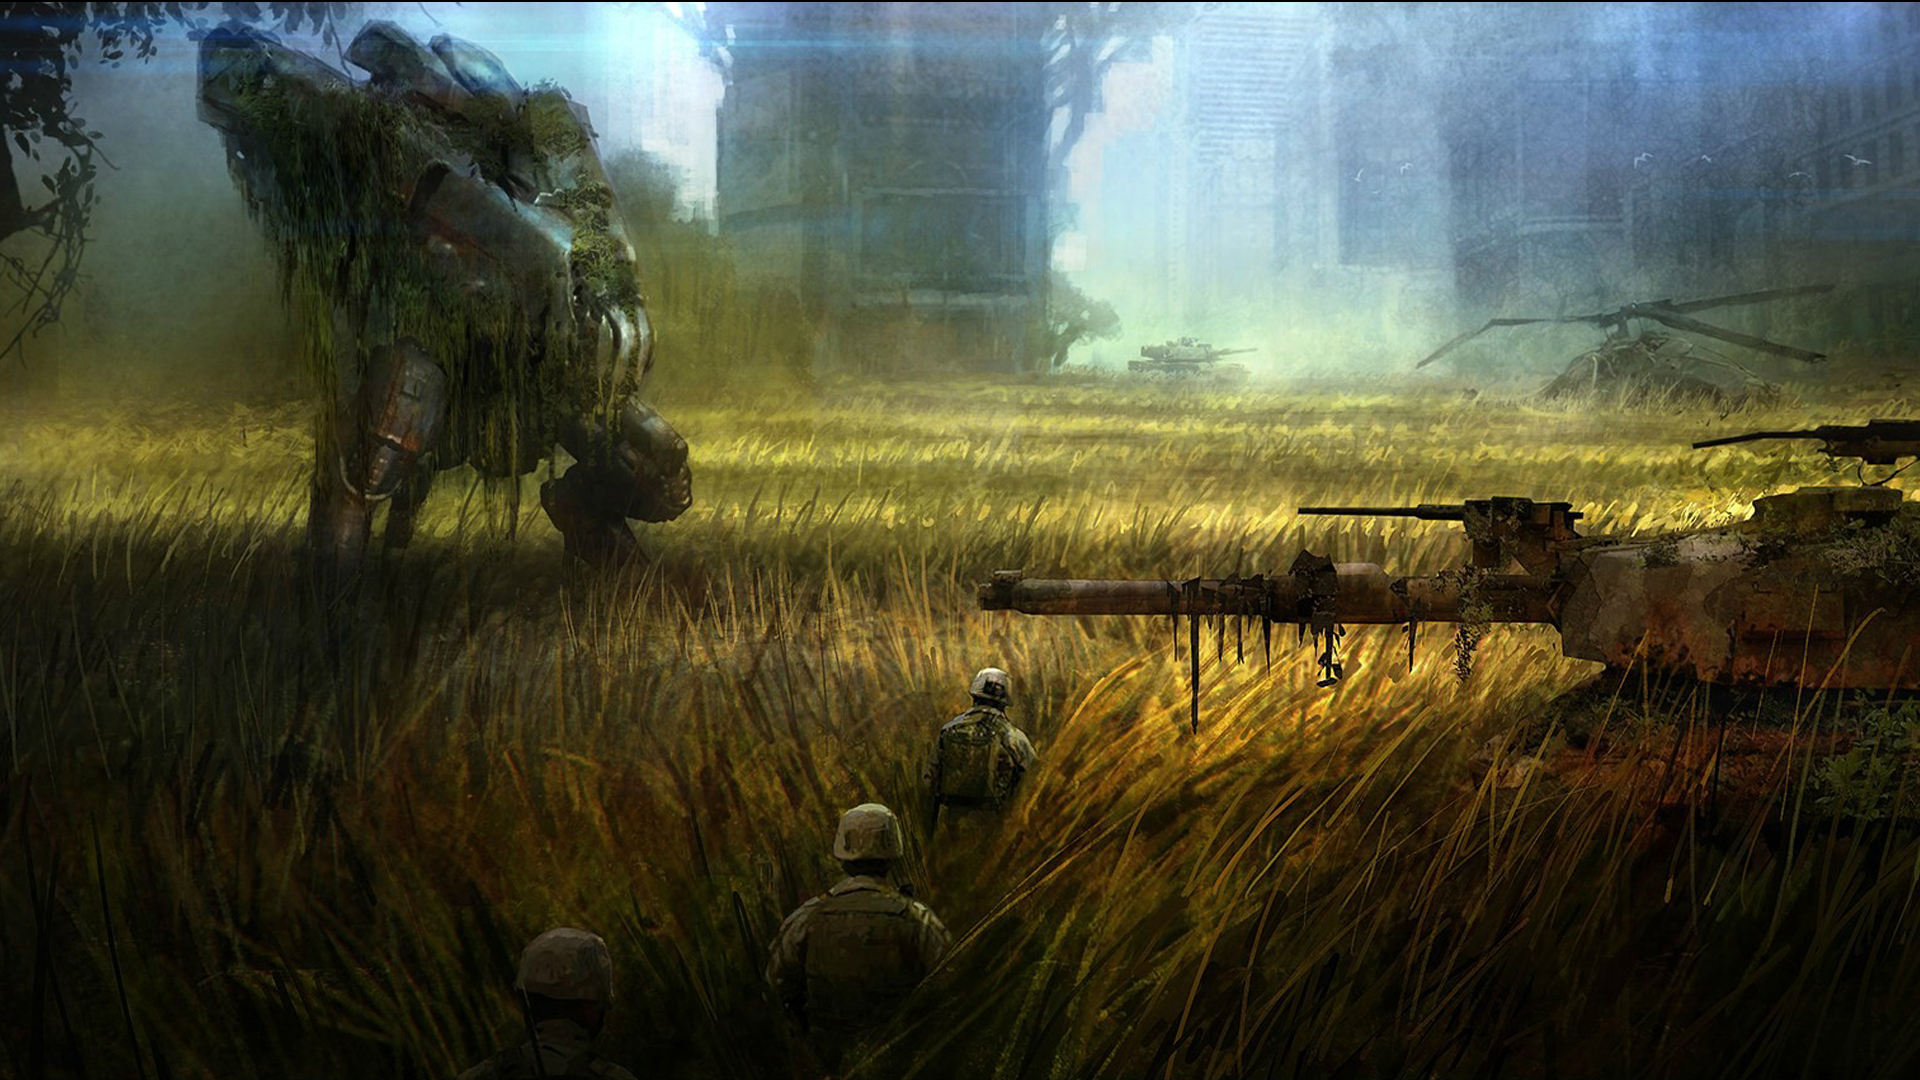 game art wallpaper,action adventure game,pc game,strategy video game,grass,games